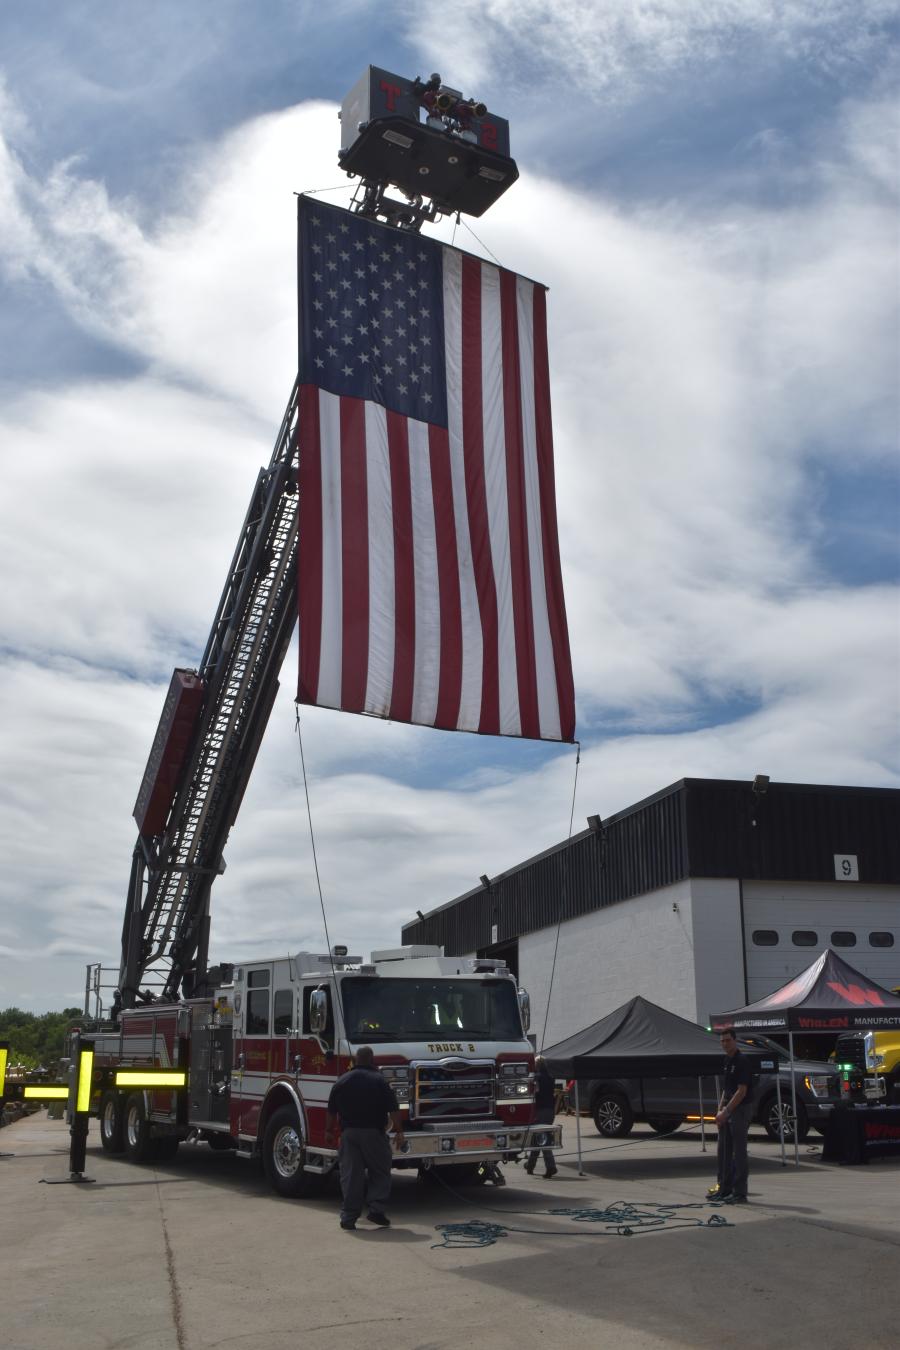 Old Glory was proudly on display.
(CEG photo) 